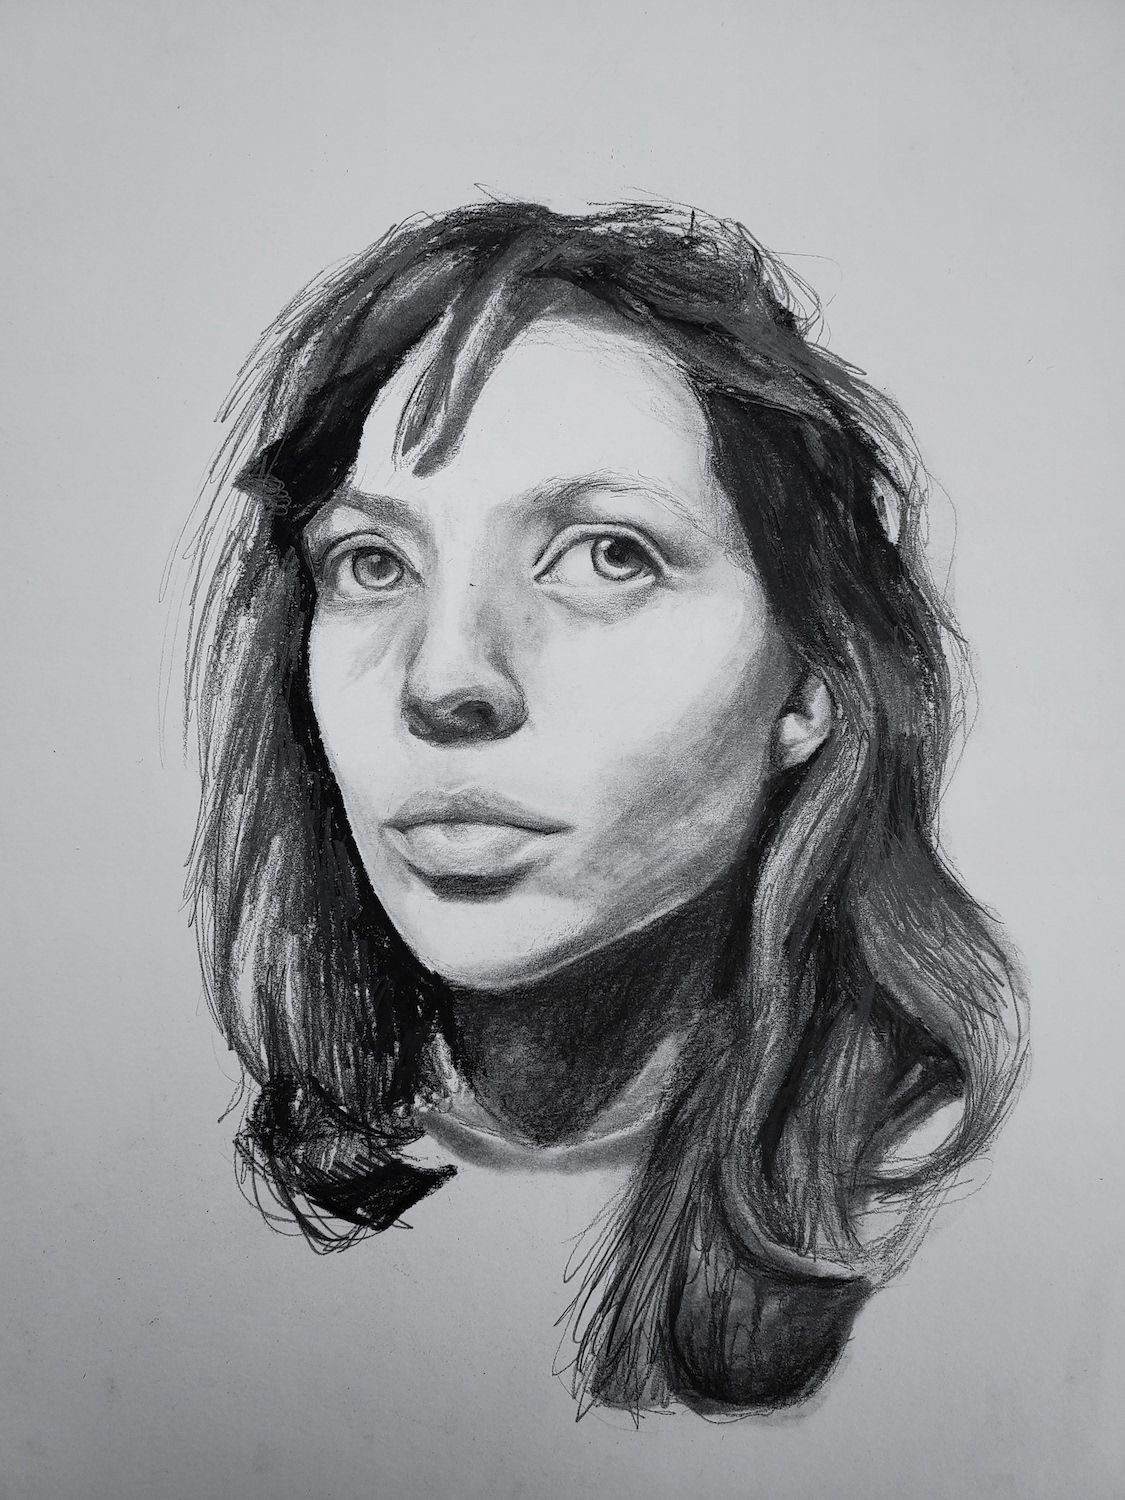 thumbnail of Self-portrait by Sigrid Stode. Medium: Graphite and charcoal on paper. Size 17 x 14 inches Date 2020